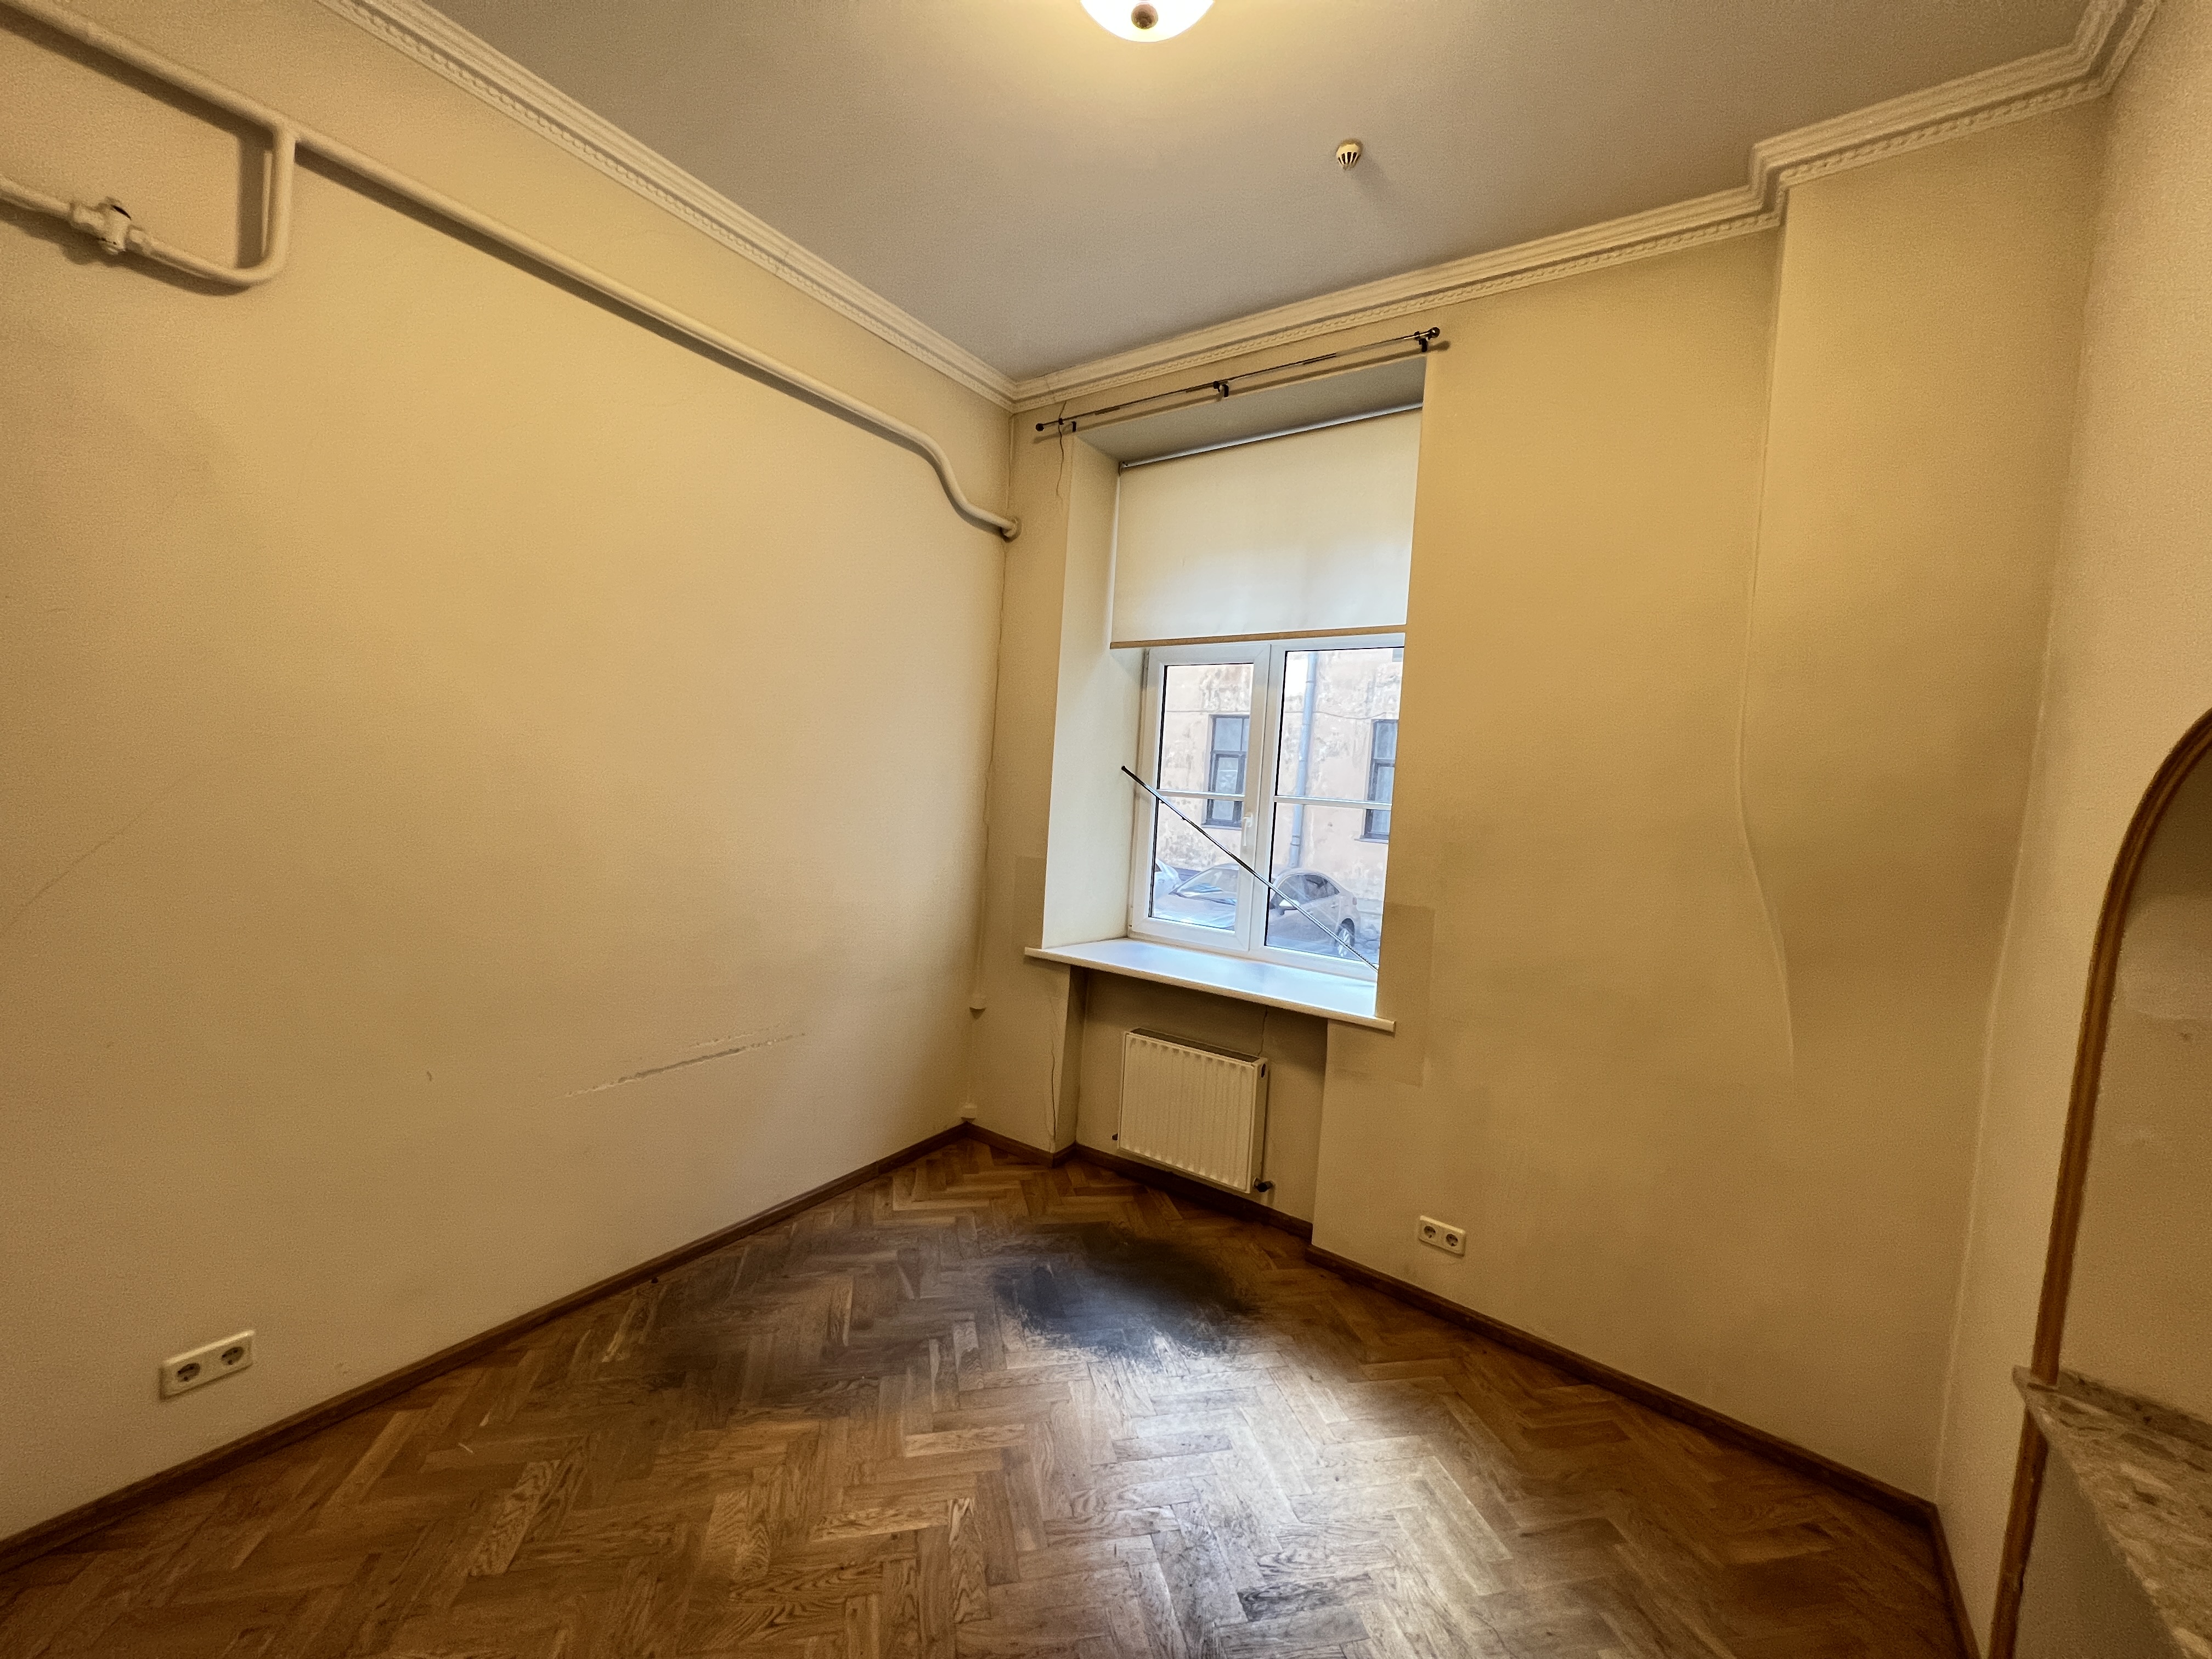 Office for rent, Jēkaba street - Image 1